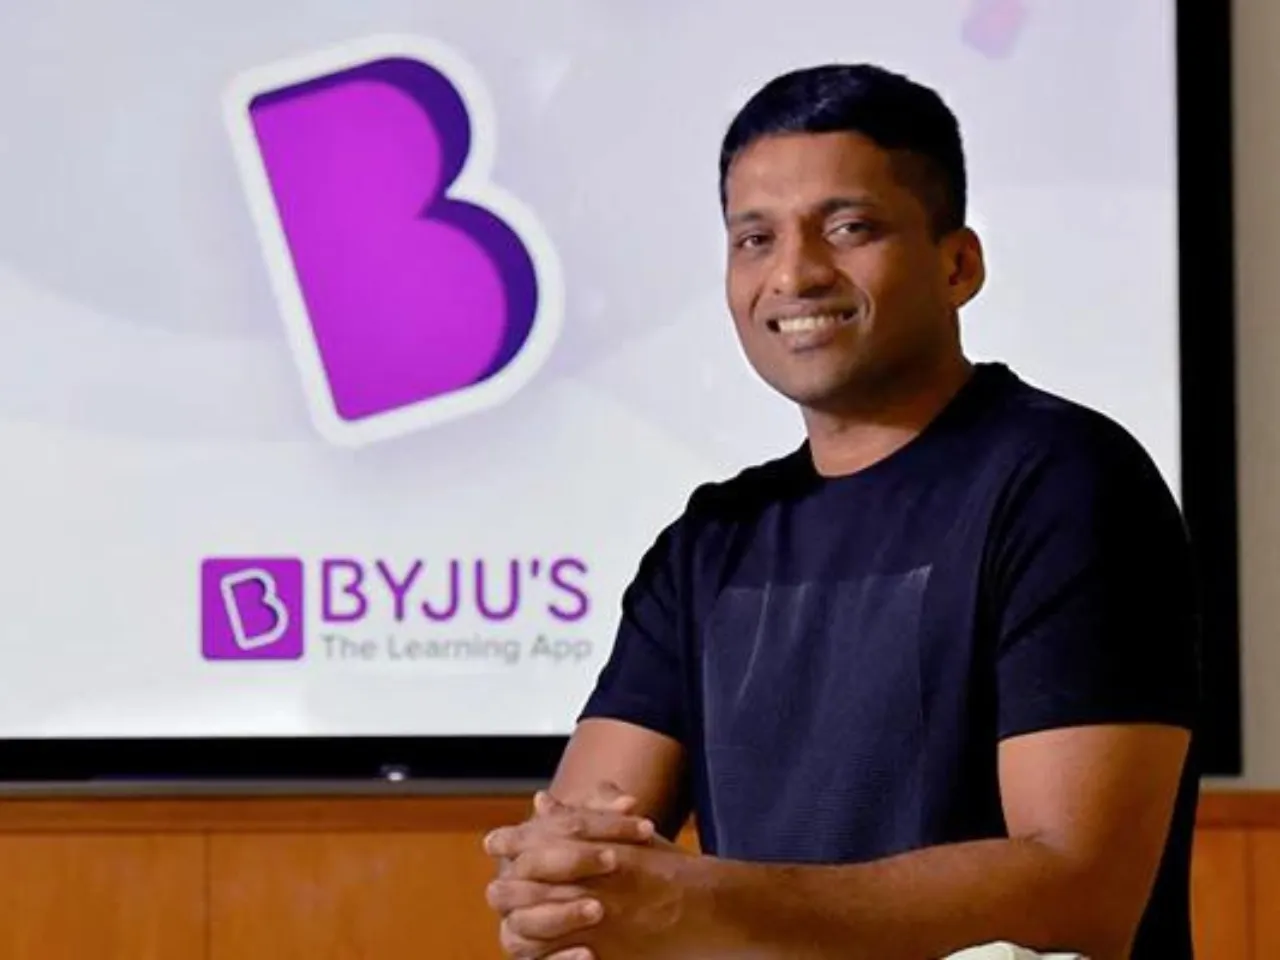 Byjus CEO